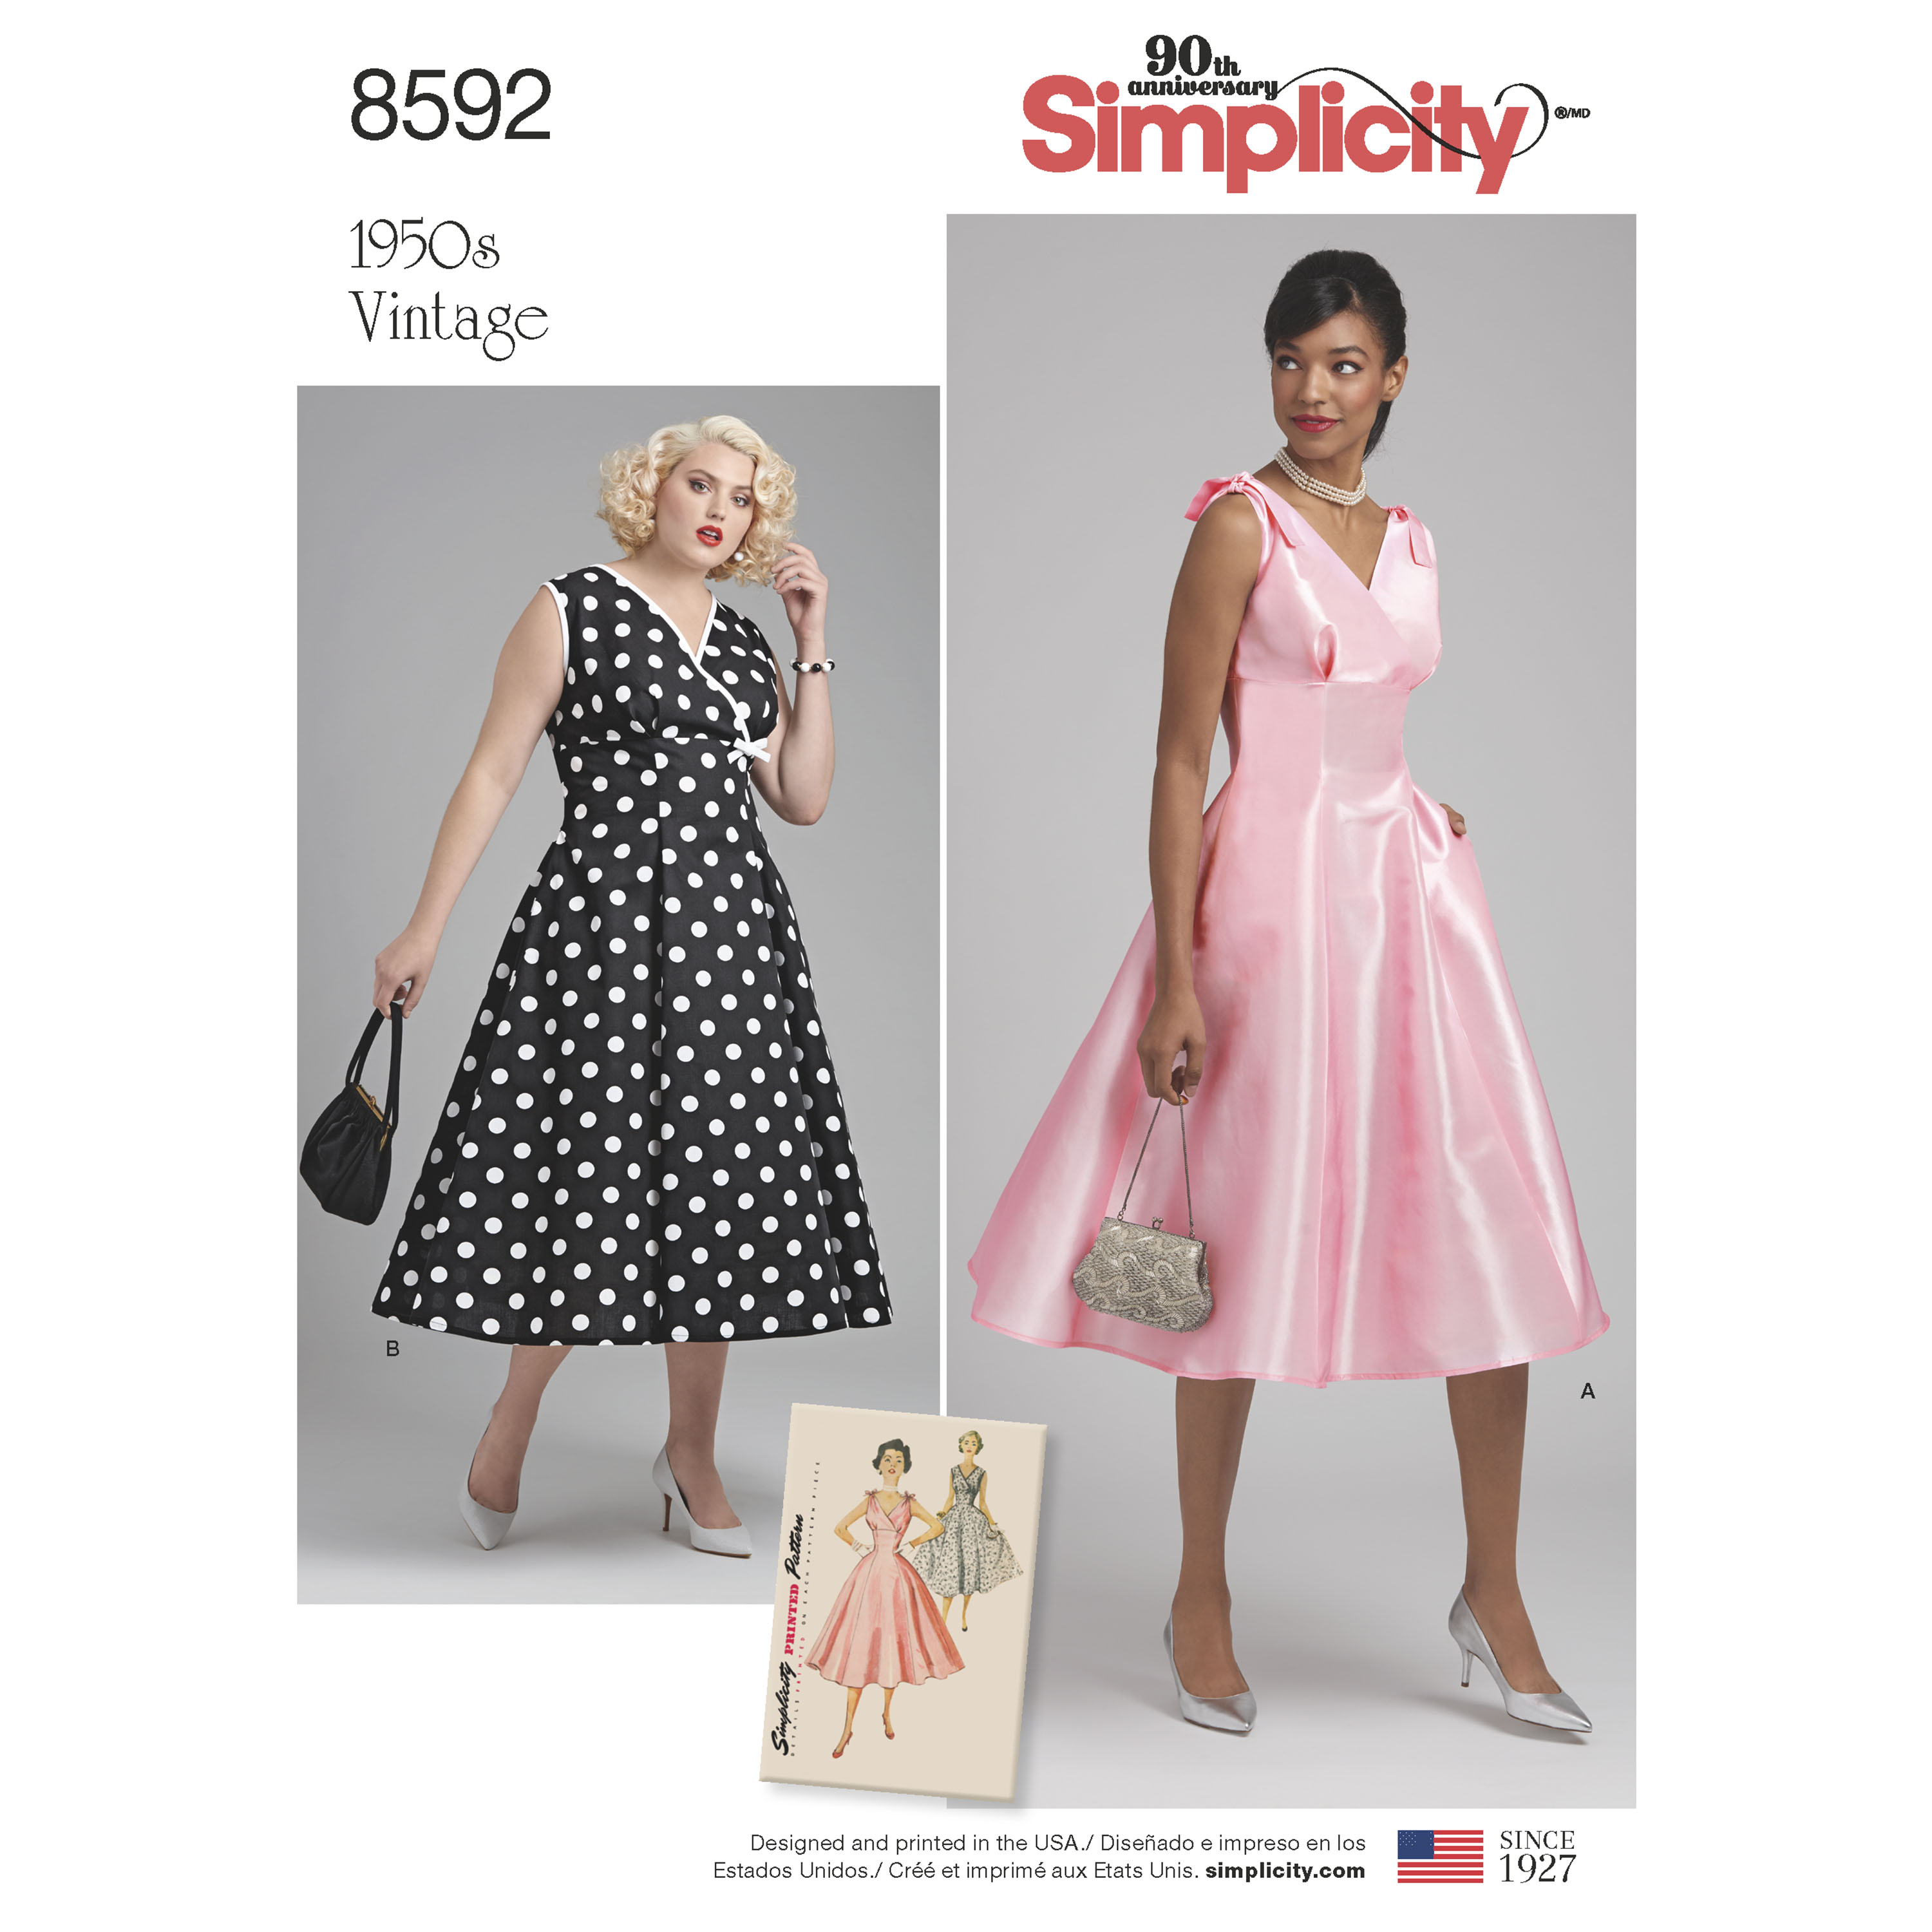 Sizes 6-28W UPick SIMPLICITY VINTAGE 1950s SERIES Misses Retro Sewing Patterns 